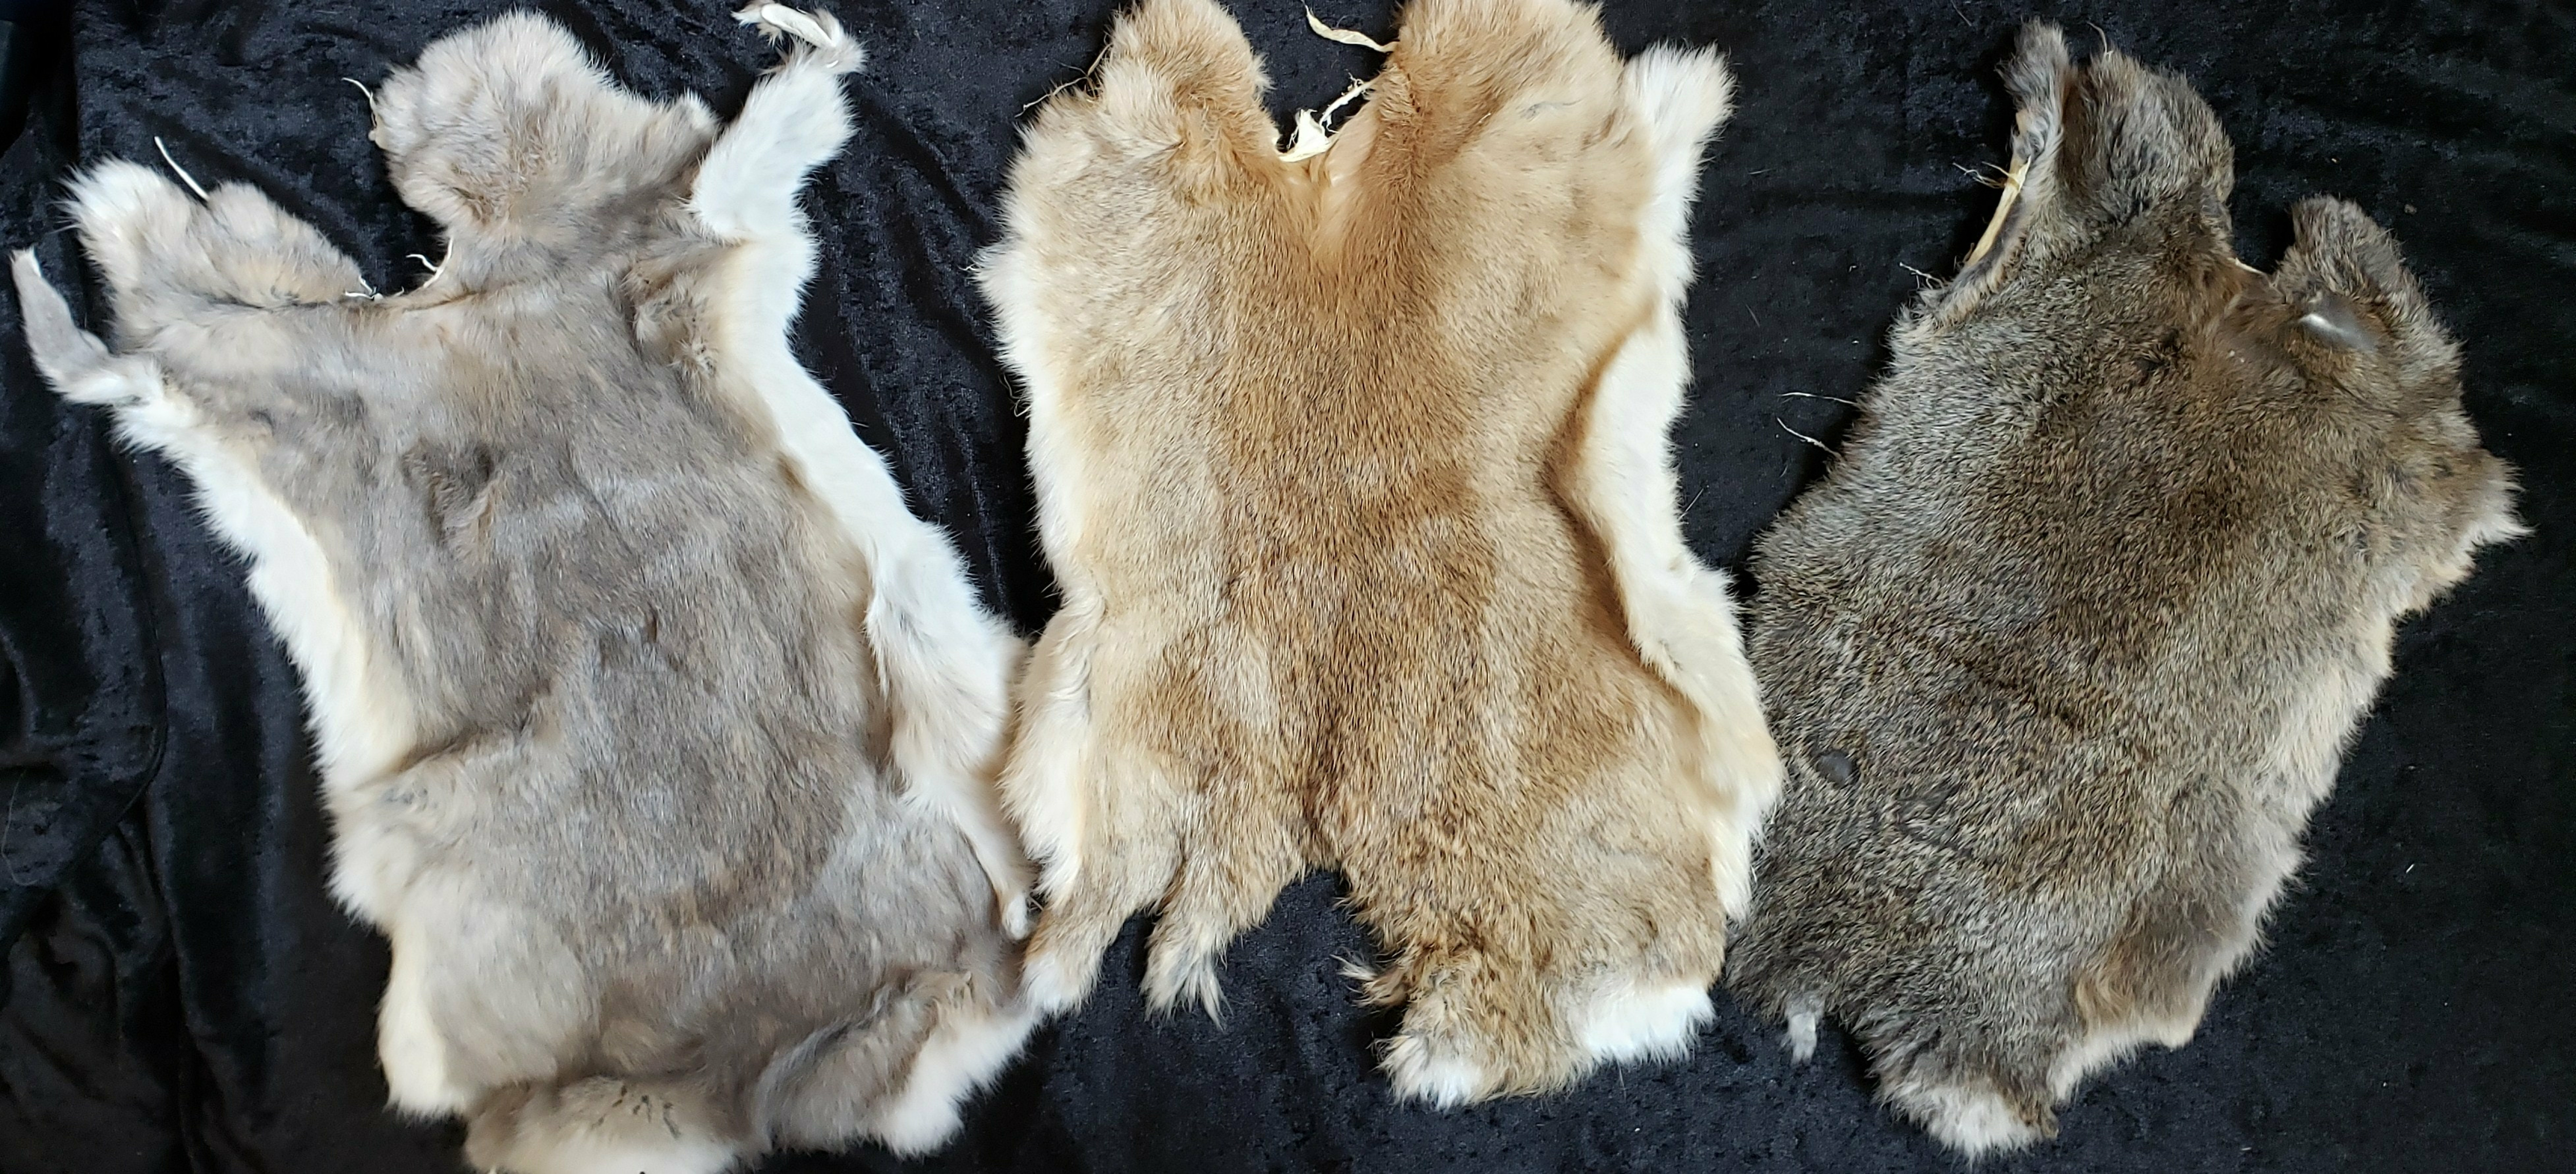 Rabbit Skins - Naturally Colored - Montana Leather Company